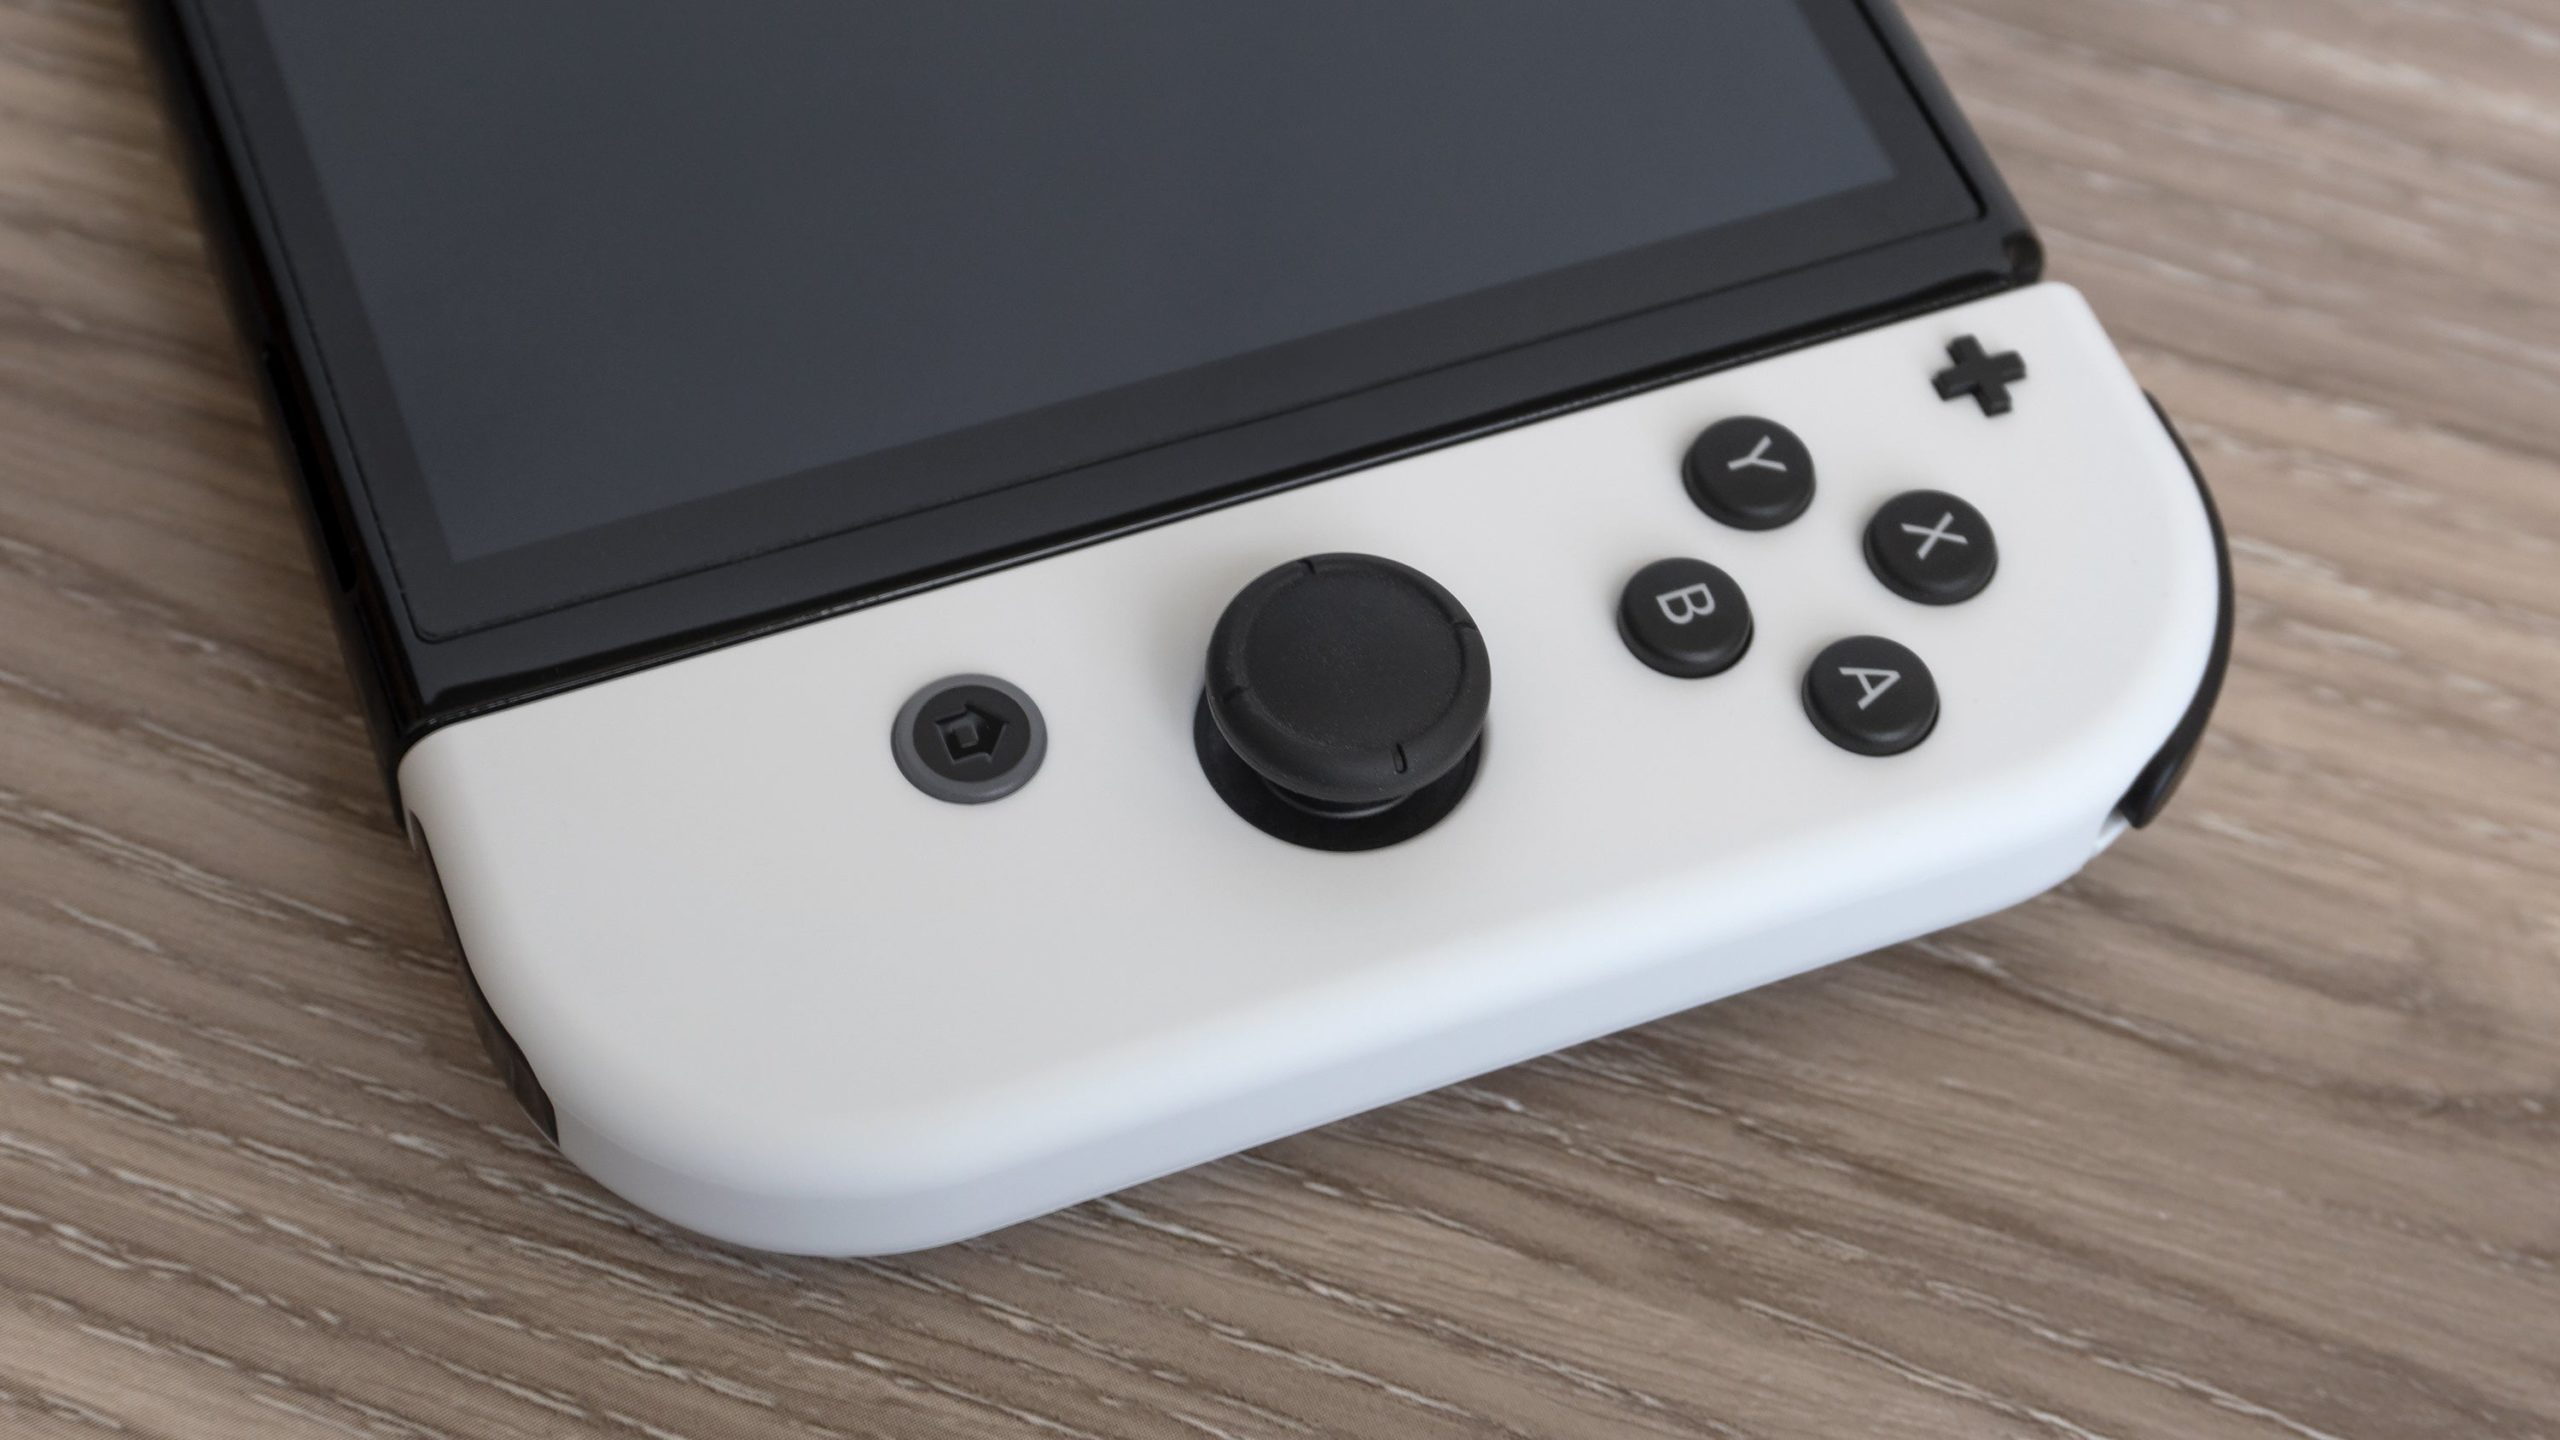 Will the Joy-Cons on the Switch OLED exhibit joystick drift too? That remains to be seen, but is a very real possibility. (Photo: Andrew Liszewski - Gizmodo)